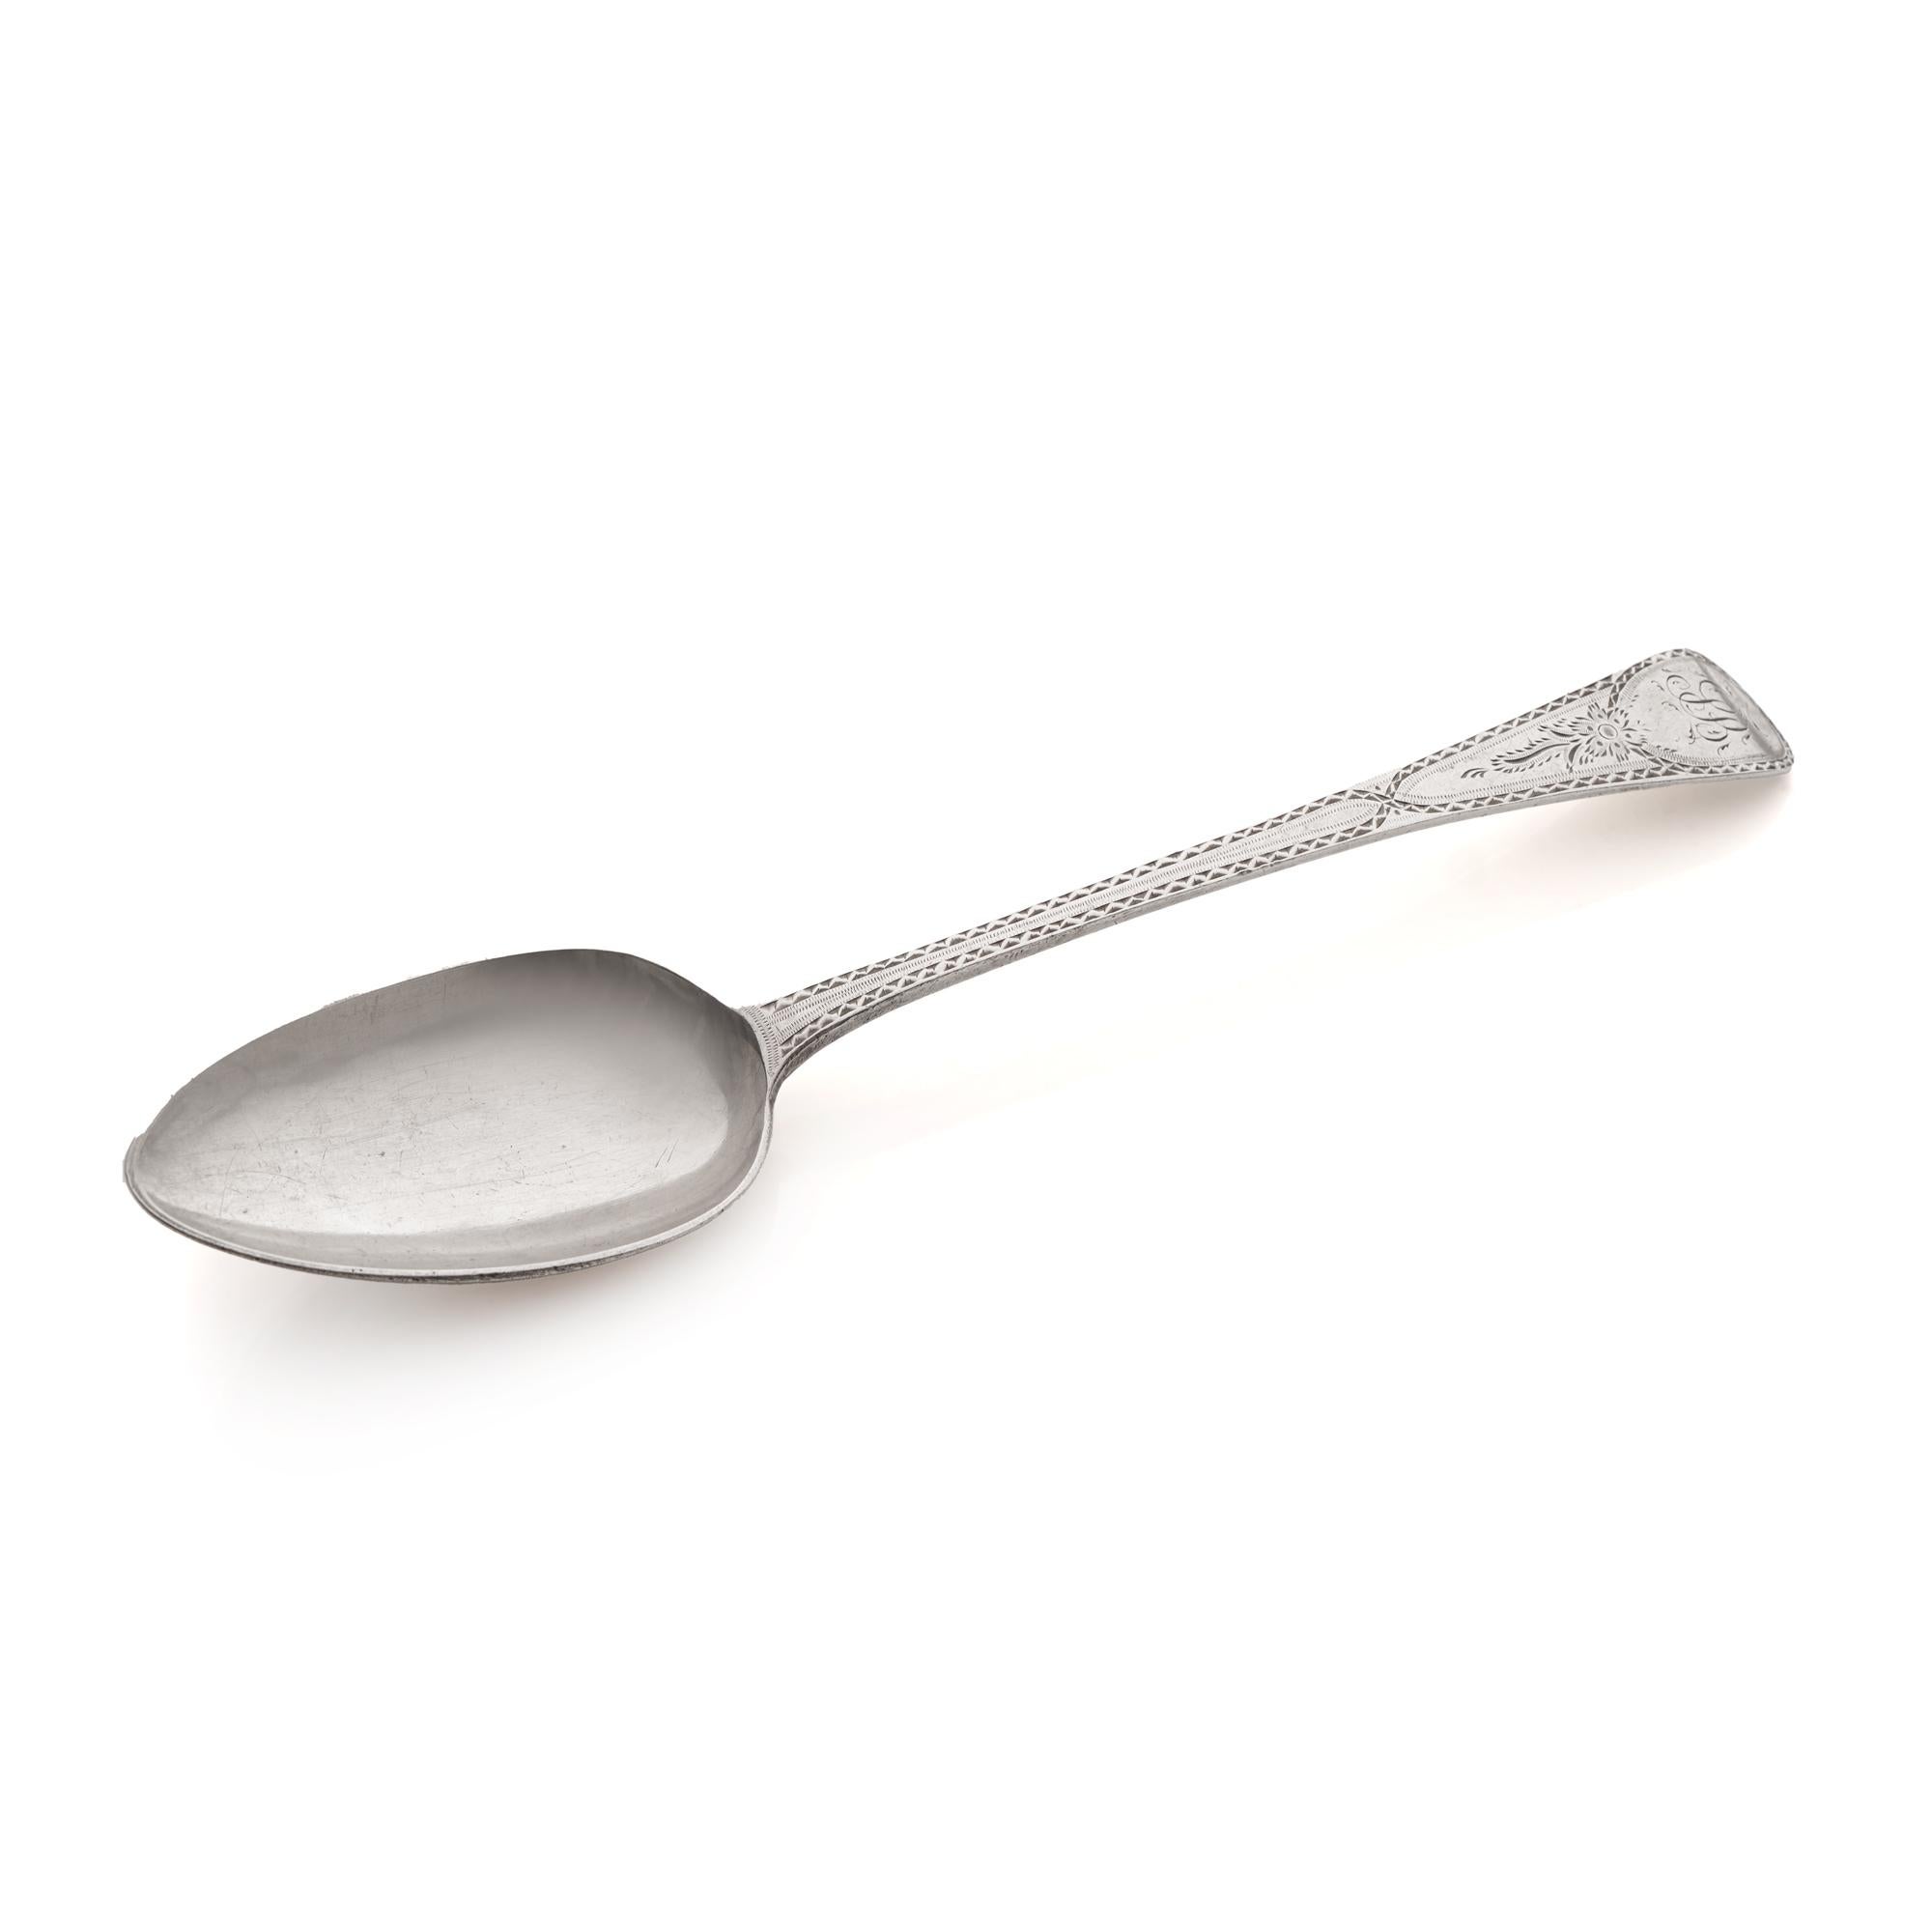 Antique Georgian Sterling Silver Spoon with Highly Ornate Design.

This exquisite spoon, crafted from sterling 925 silver, boasts intricate ornamentation that reflects the elegance of the Georgian era. Adorned with a monogram 'SB', it adds a